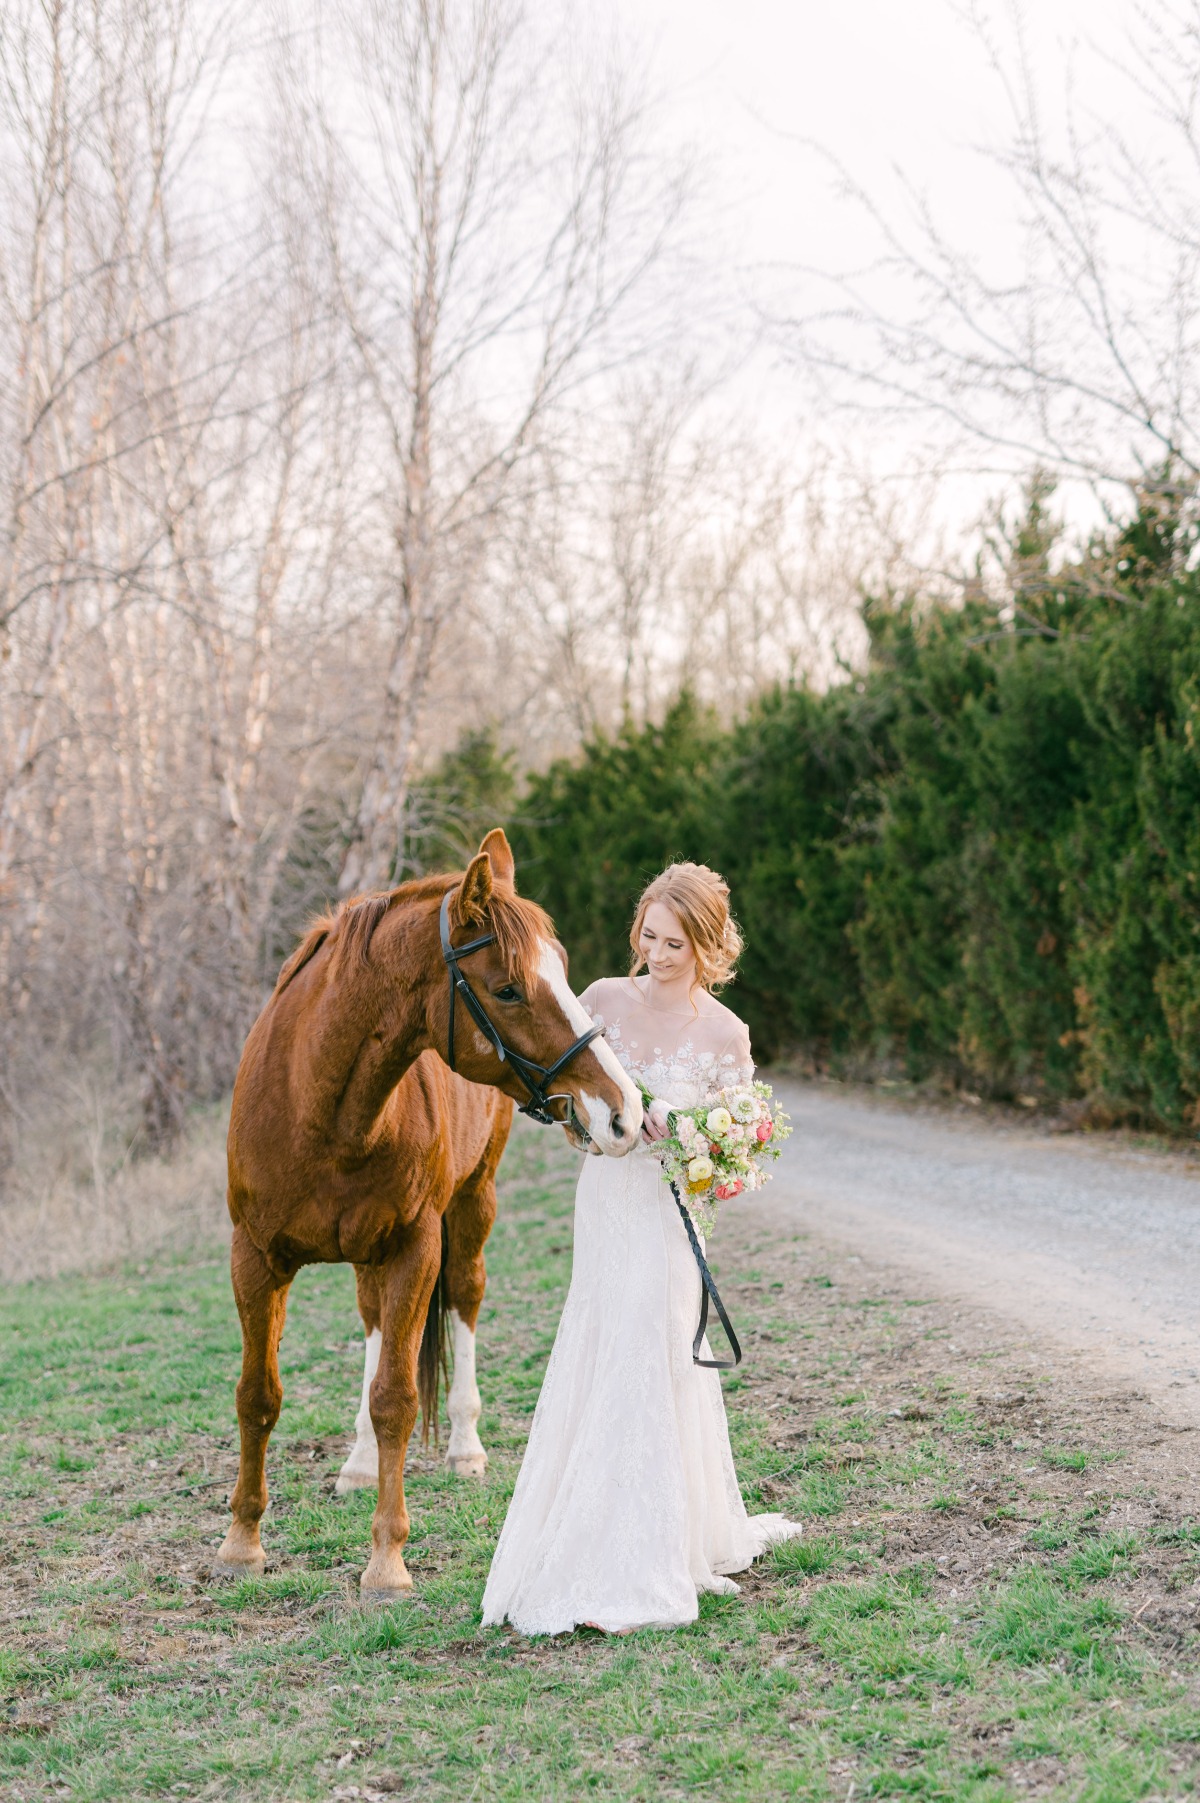 Vintage inspired bride with horse